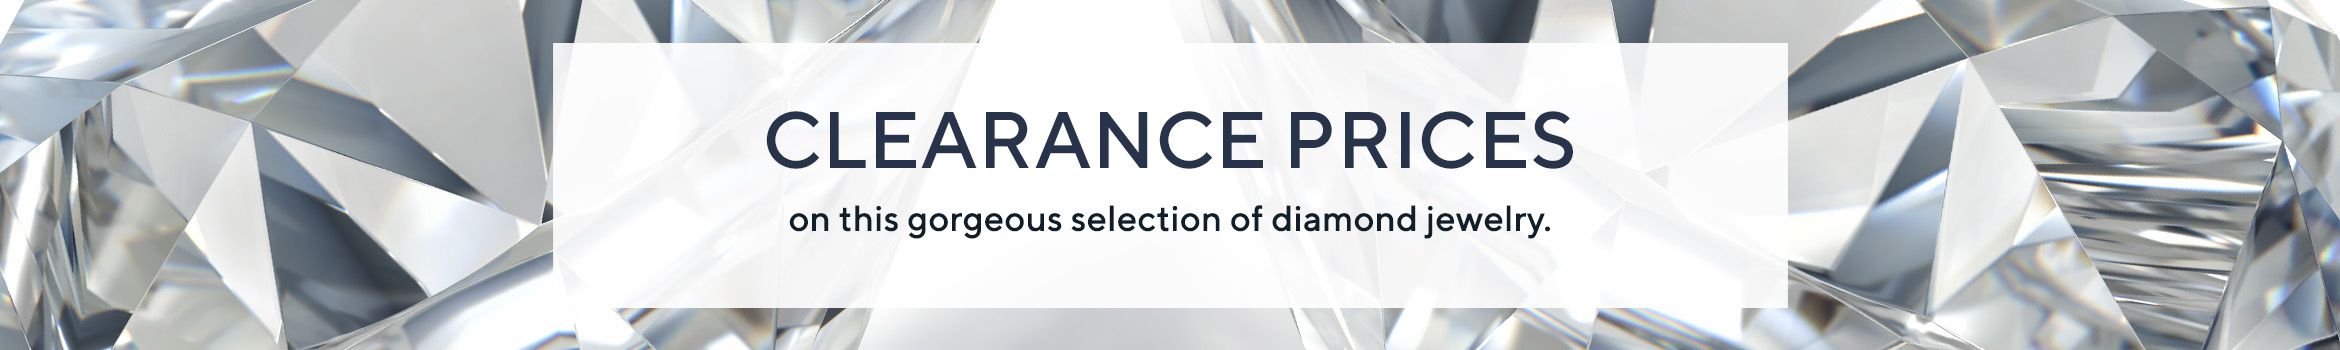 Clearance Prices on this gorgeous selection of diamond jewelry.